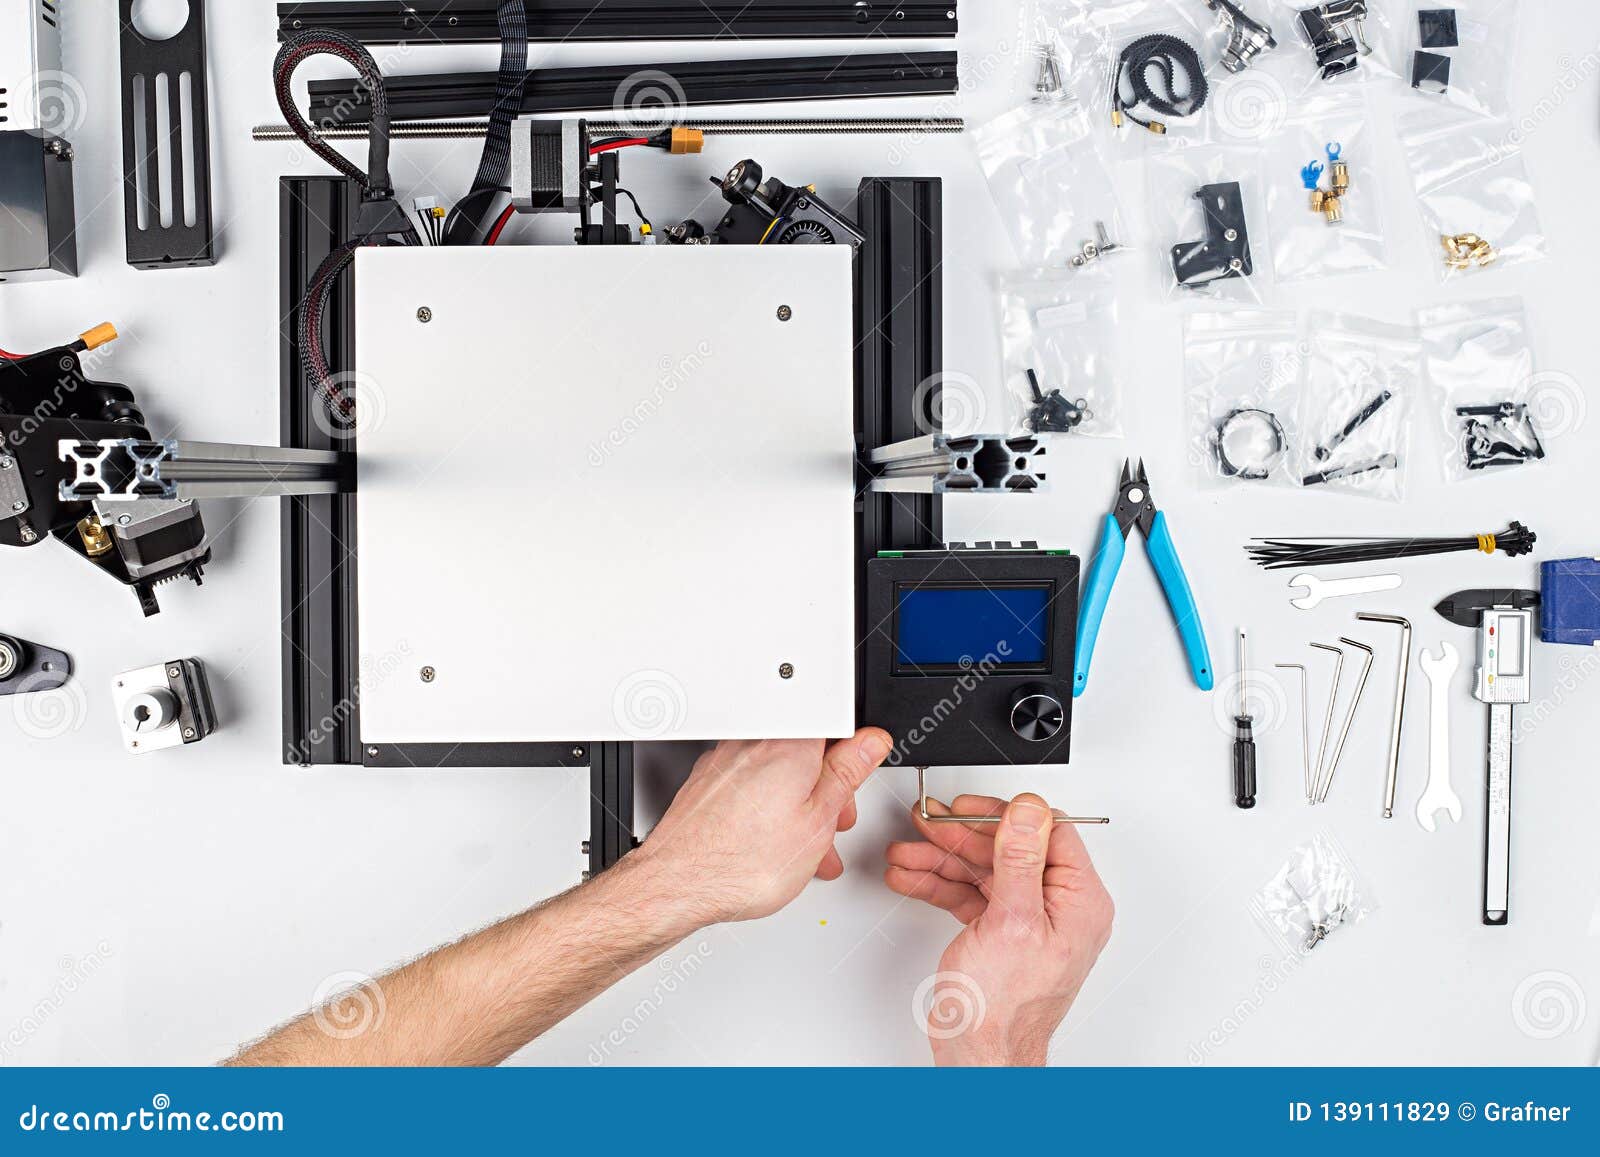 Man Student Assembly of 3D Printer Building Kit Stock Image - Image of building, geek: 139111829